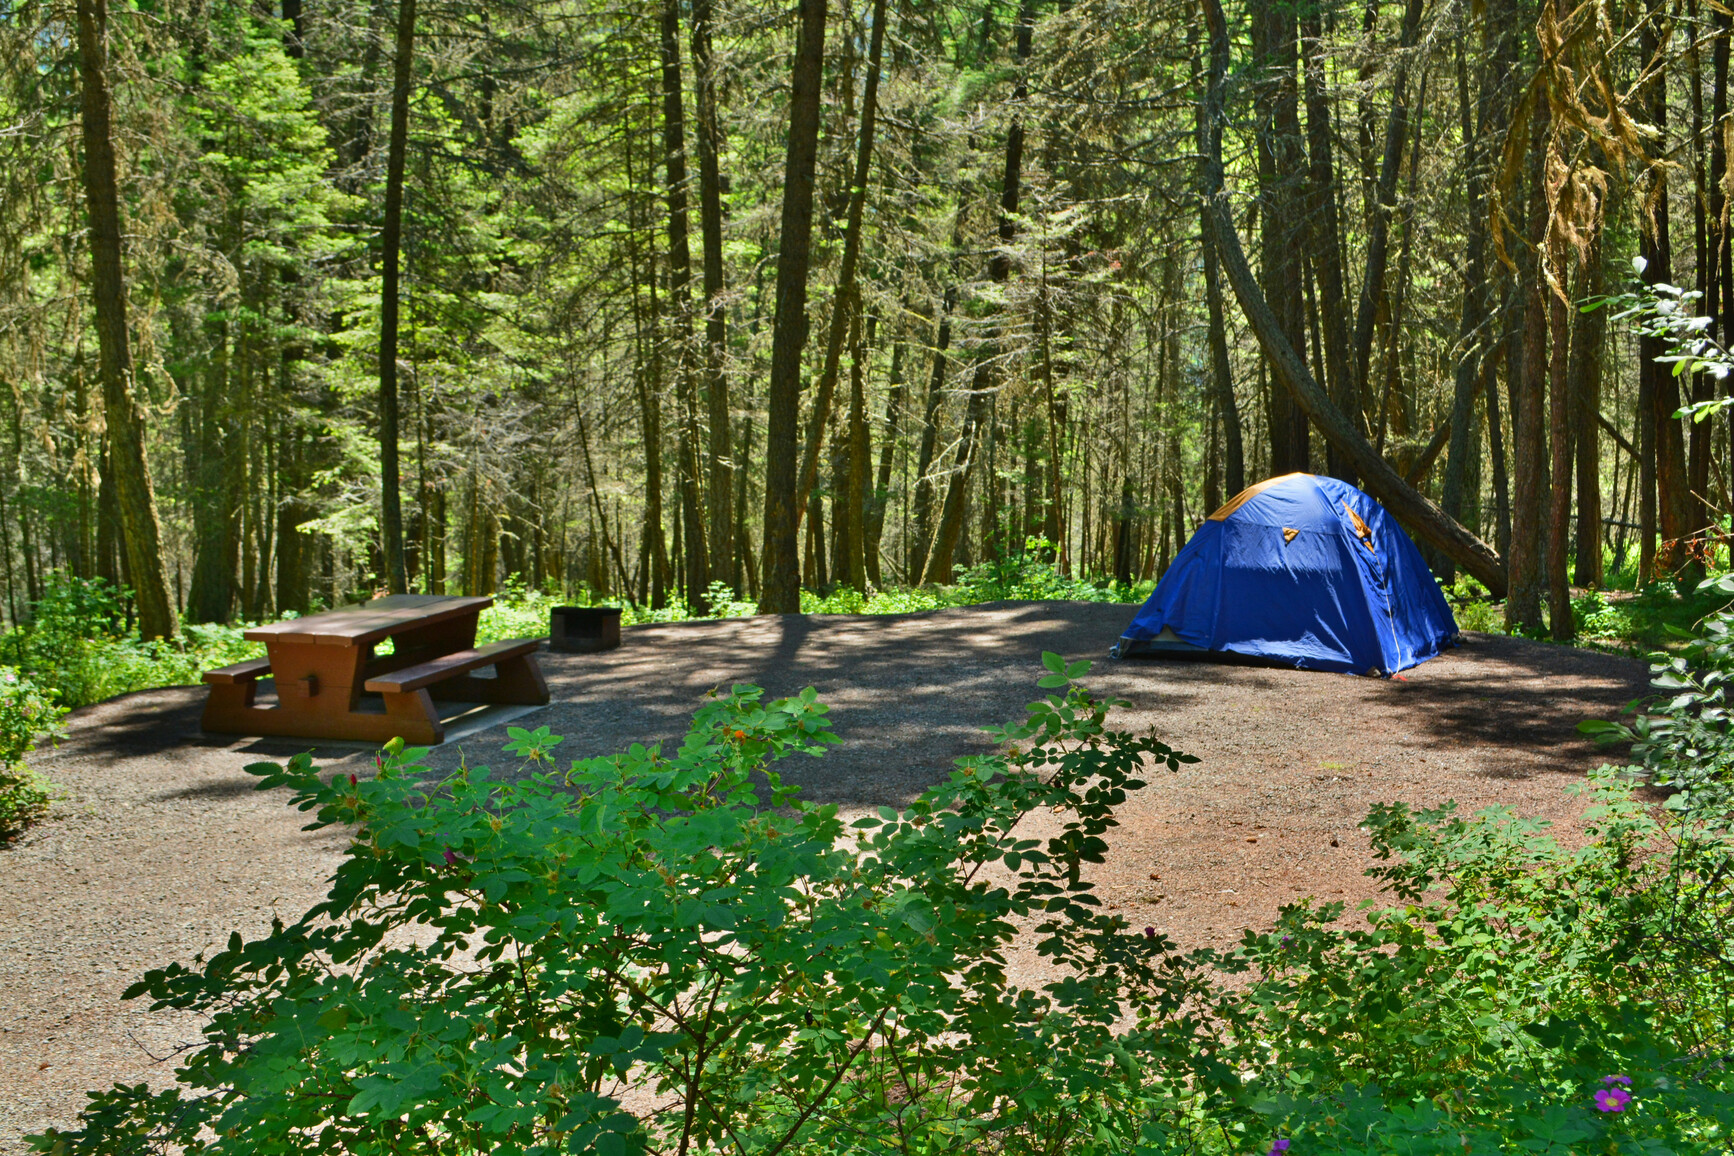 Campsite with tent in the forest.